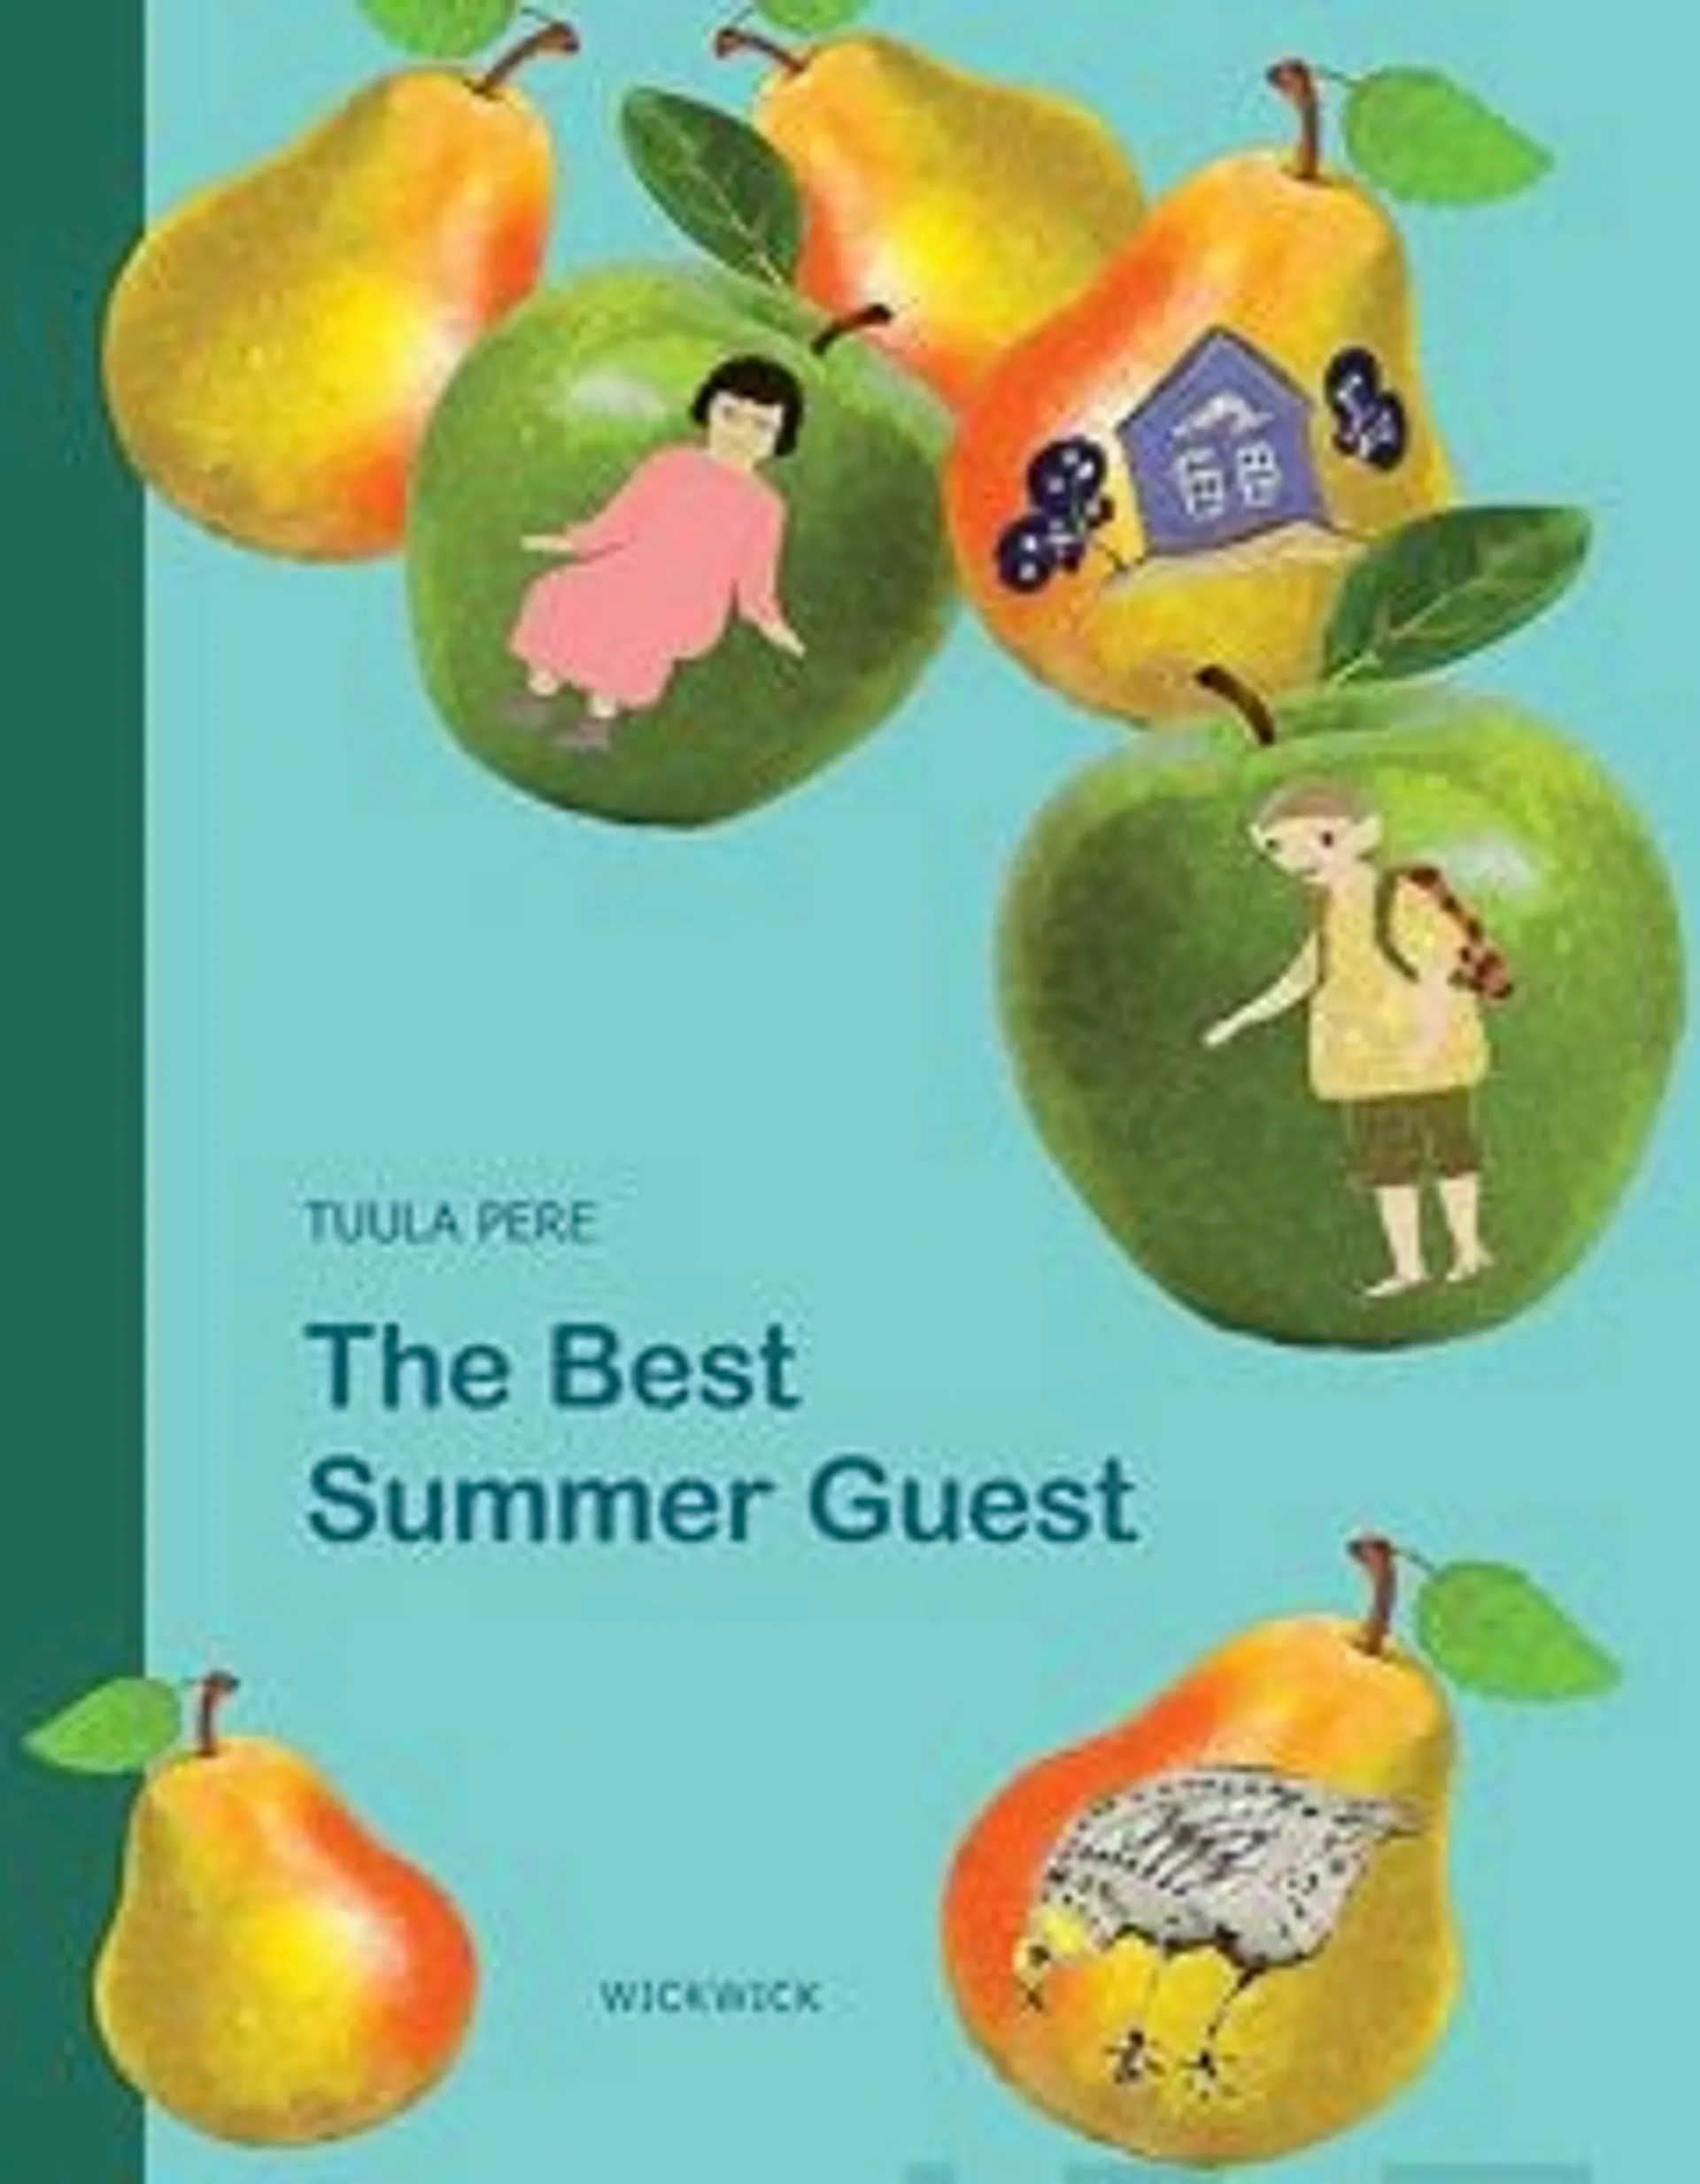 Pere, The Best Summer Guest